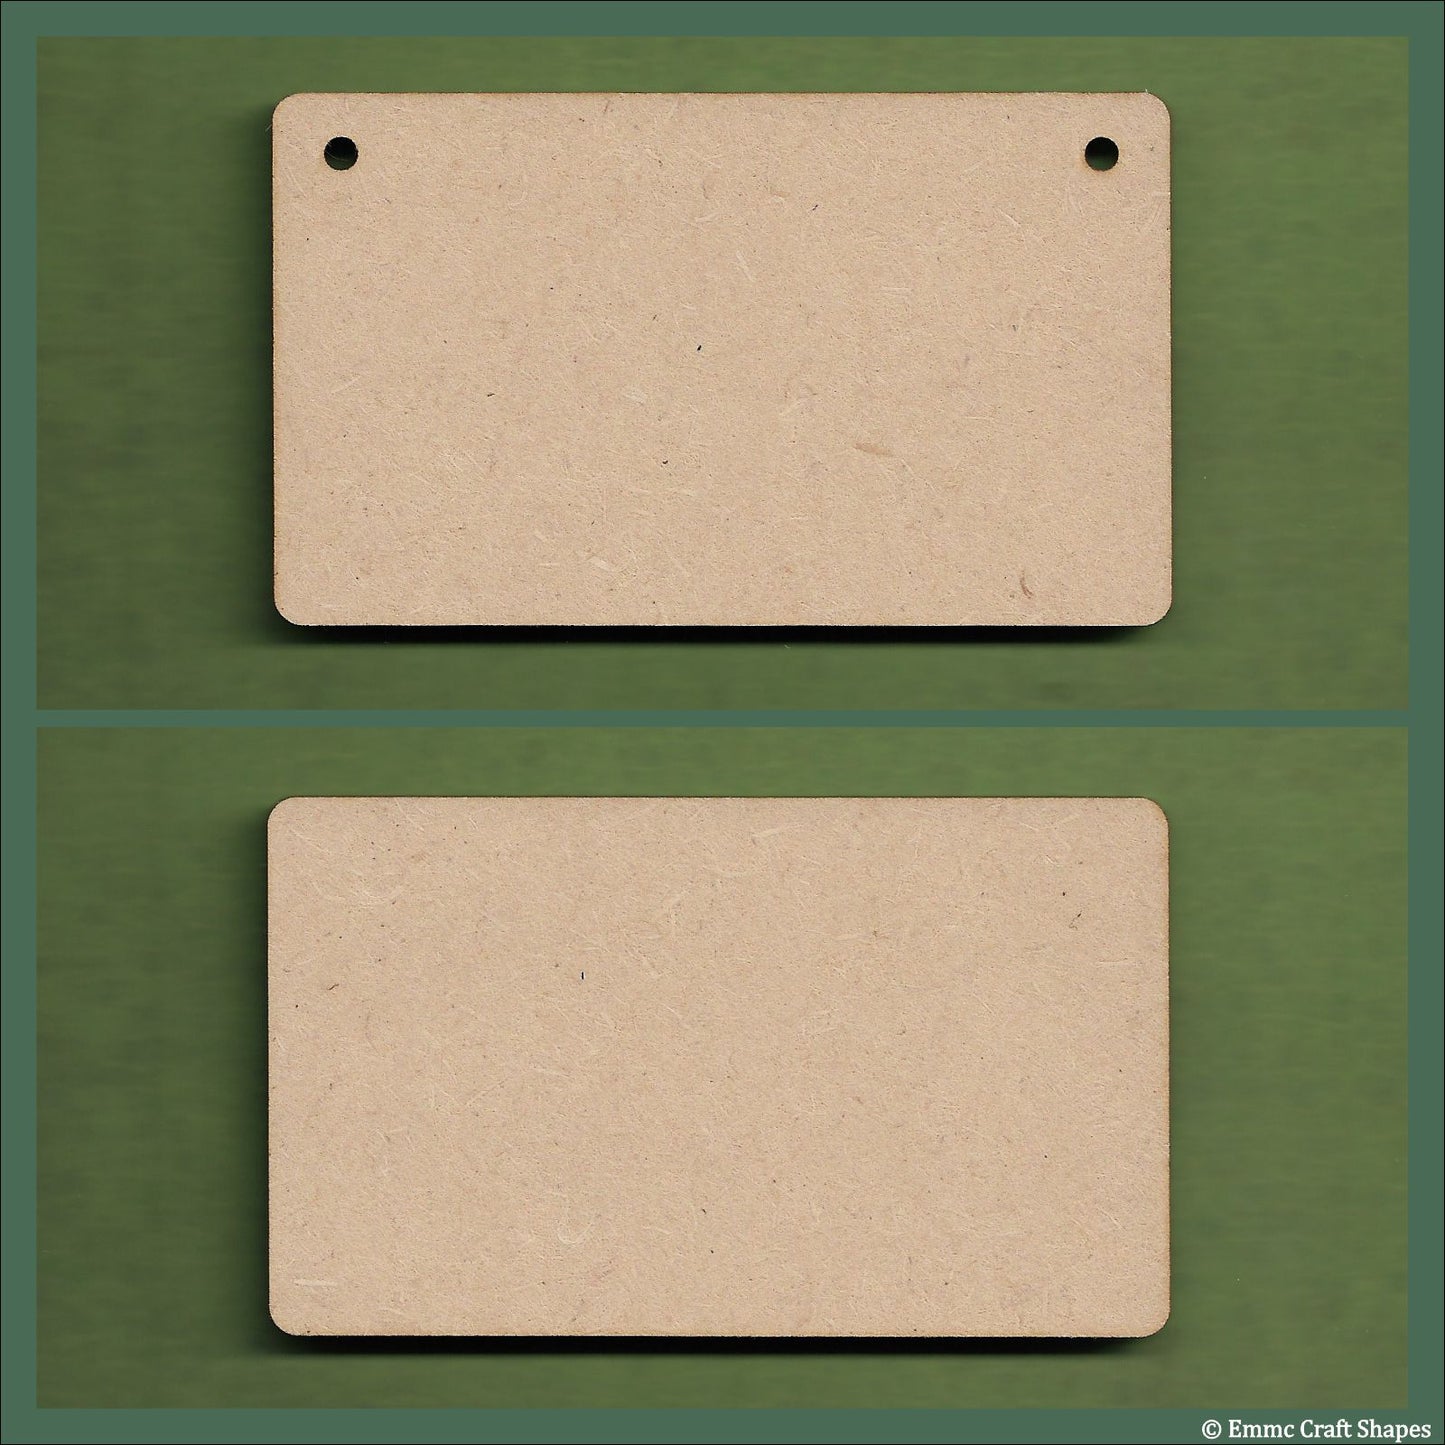 15 cm Wide 3mm thick MDF Plaques with rounded corners